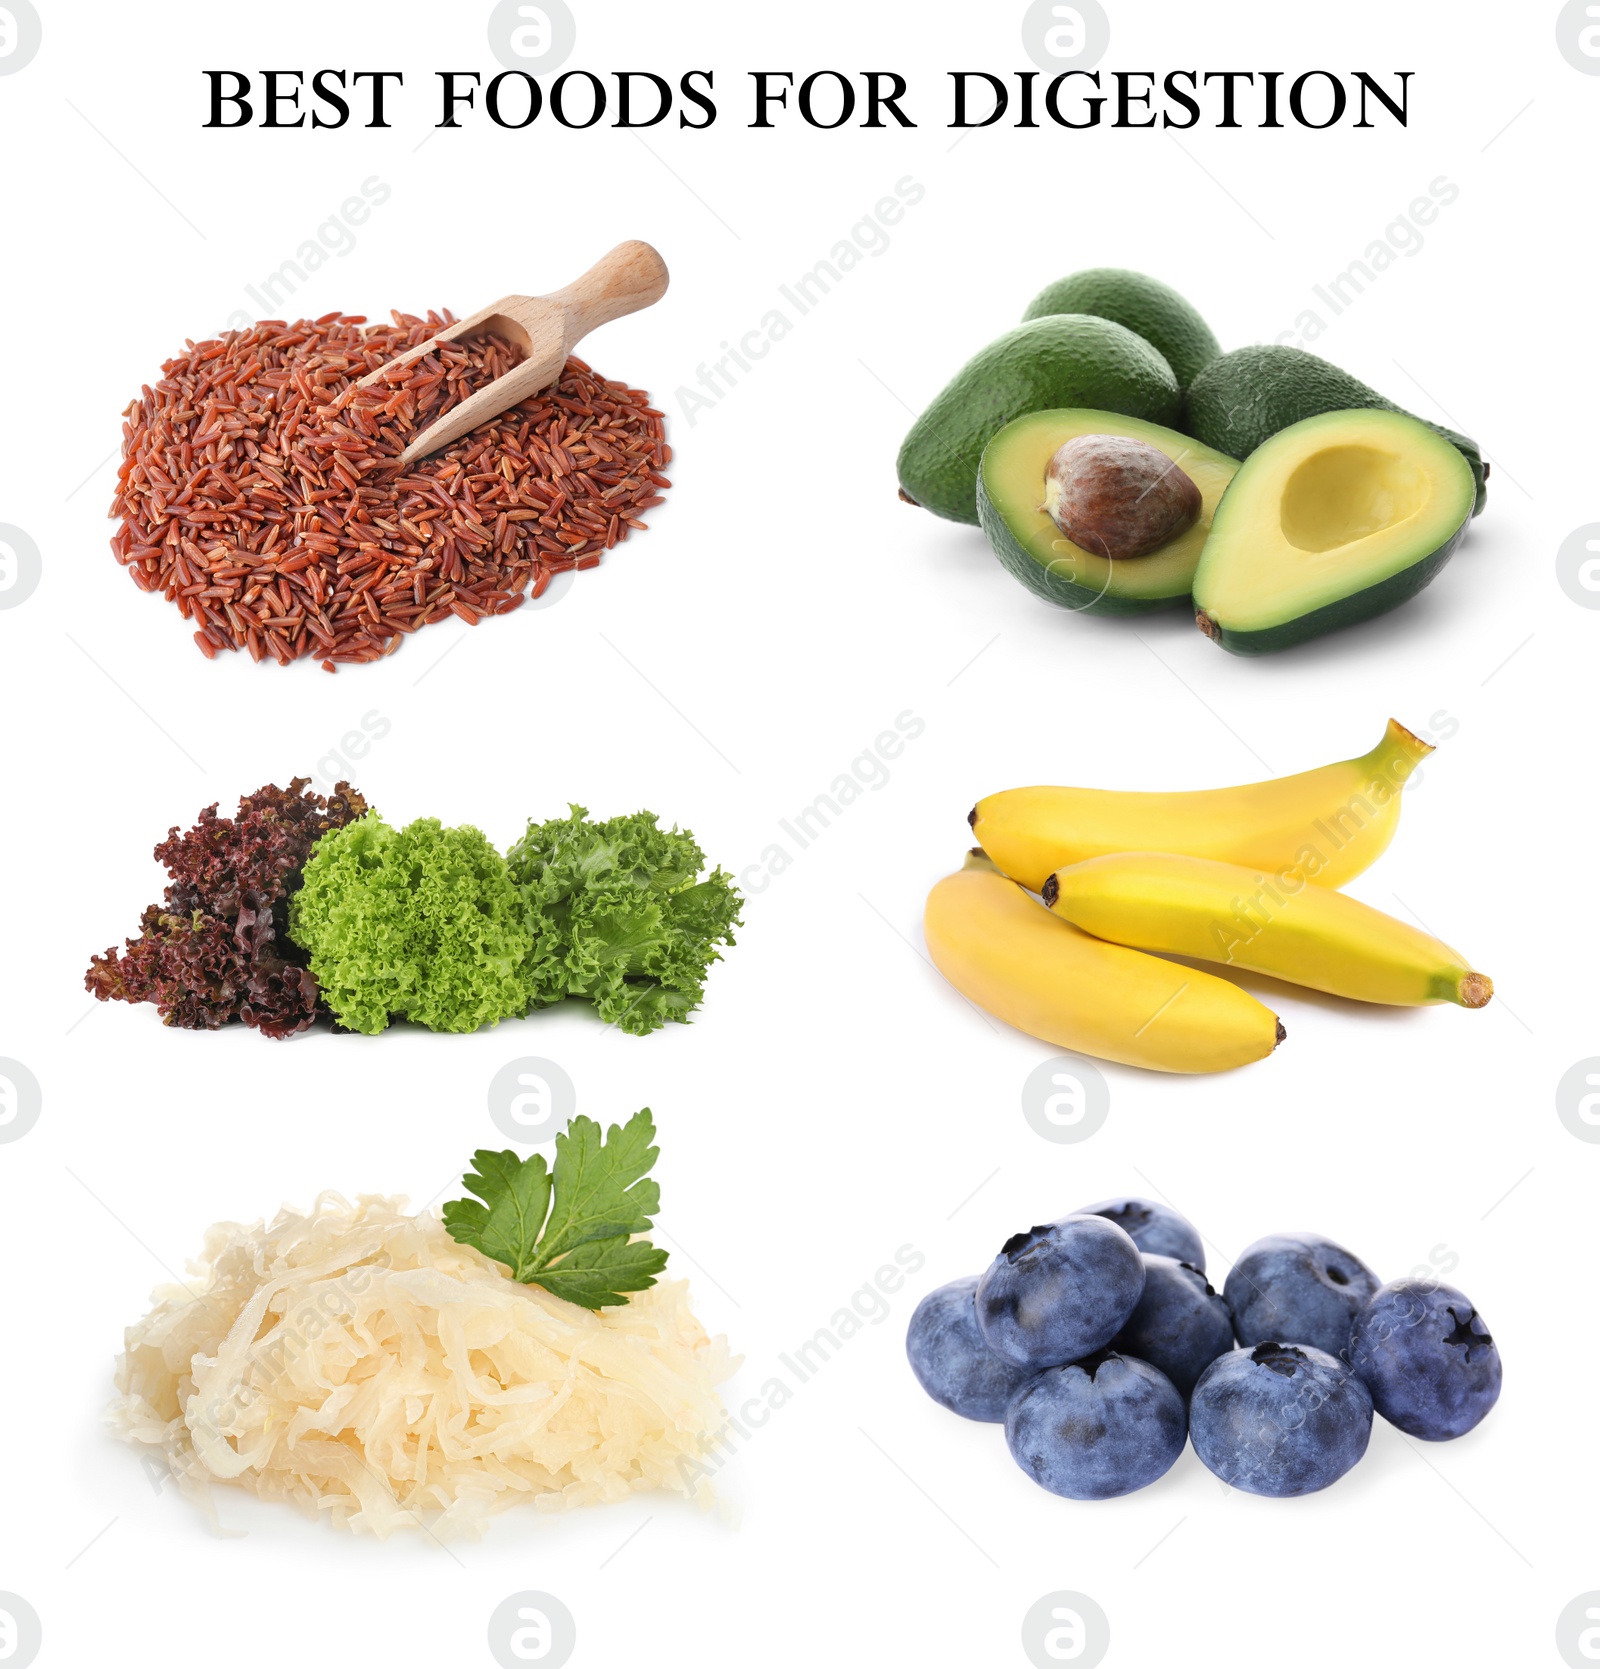 Image of Foods for healthy digestion, collage. Brown rice, lettuce, blueberries, bananas, avocado and fermented cabbage on white background